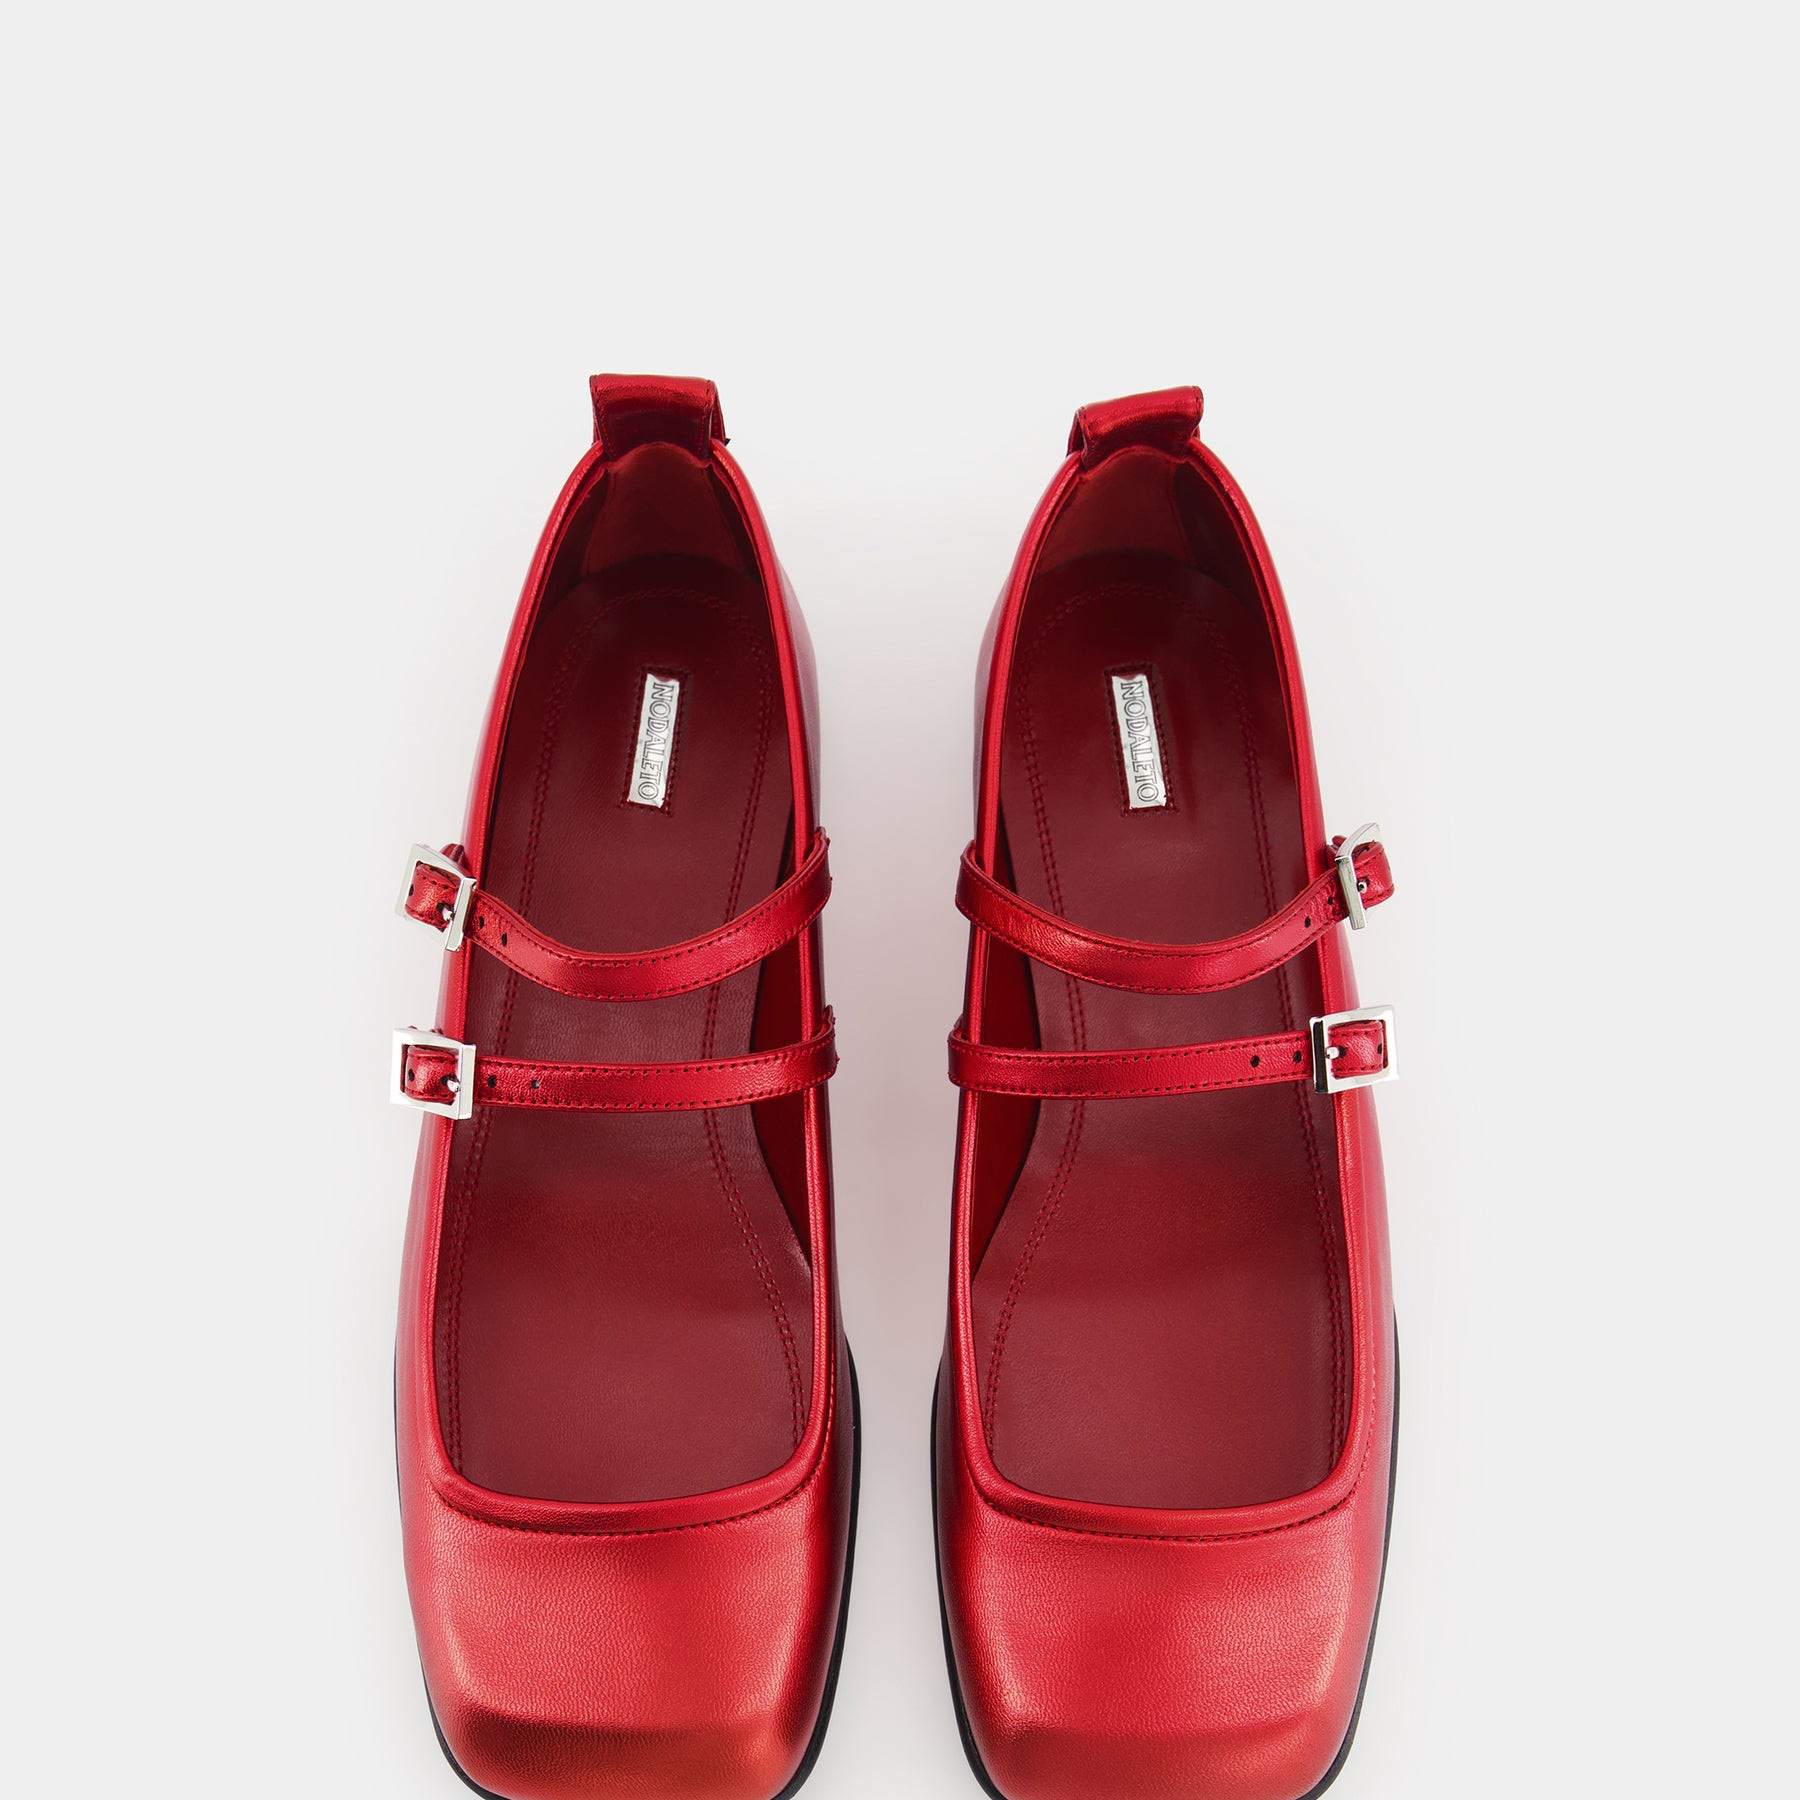 ballerina-red-leather-mary-jane-womens-shoes